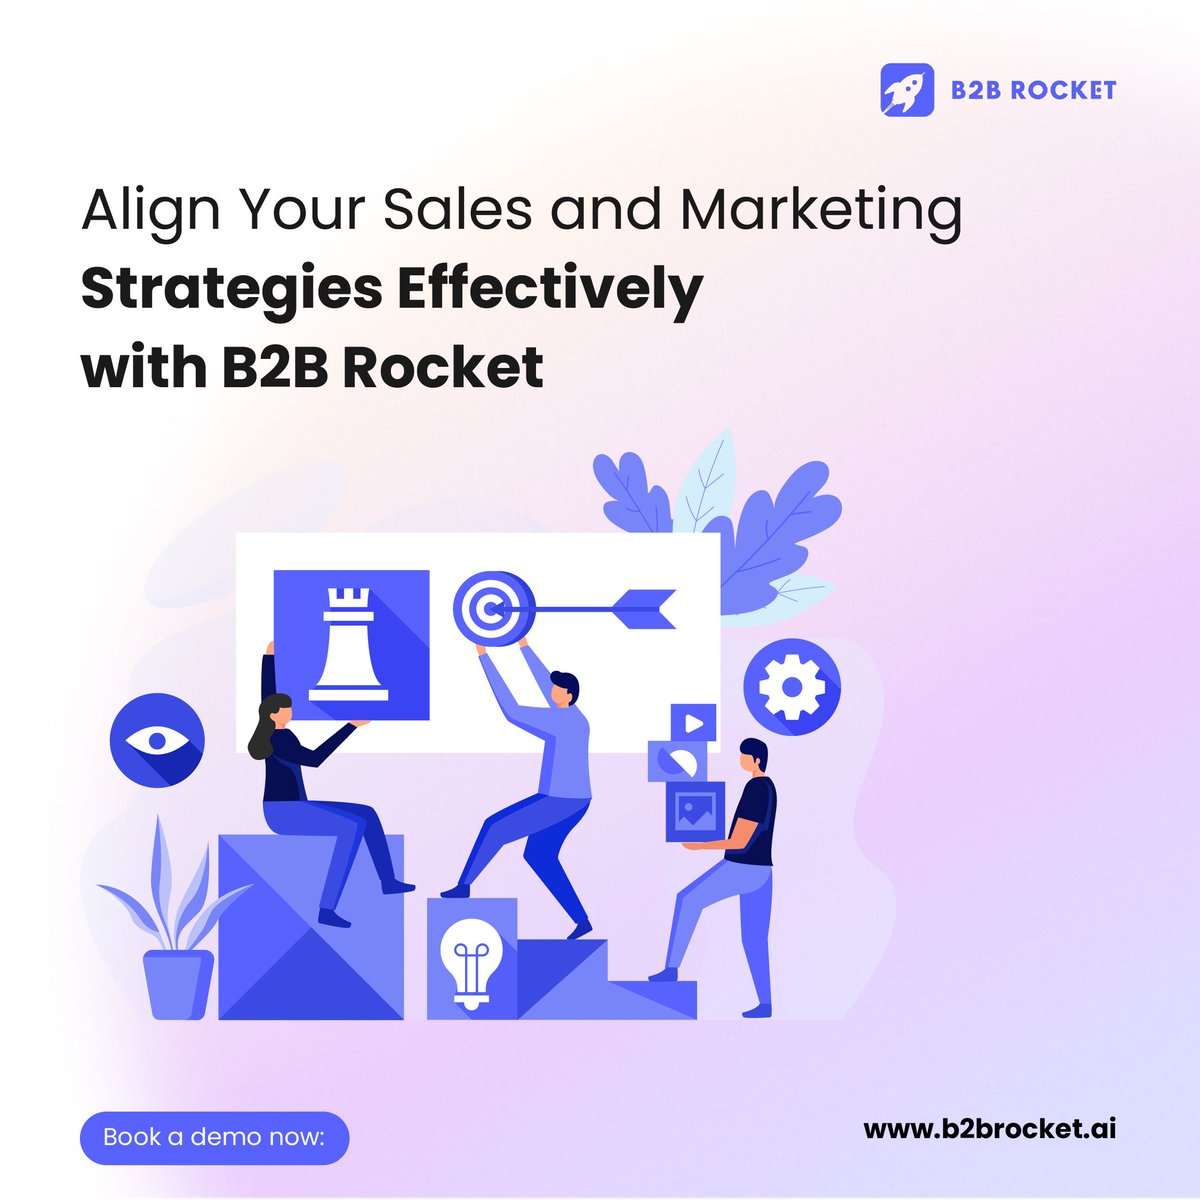 1/ Align Your Sales and Marketing Strategies Effectively with B2B Rocket

Upgrade your B2B strategy with B2B Rocket’s integration of sales and marketing automation. Our solution is designed to elevate your sales strategy effortlessly.

#SalesAndMarketingIntegration #B2BSolutions